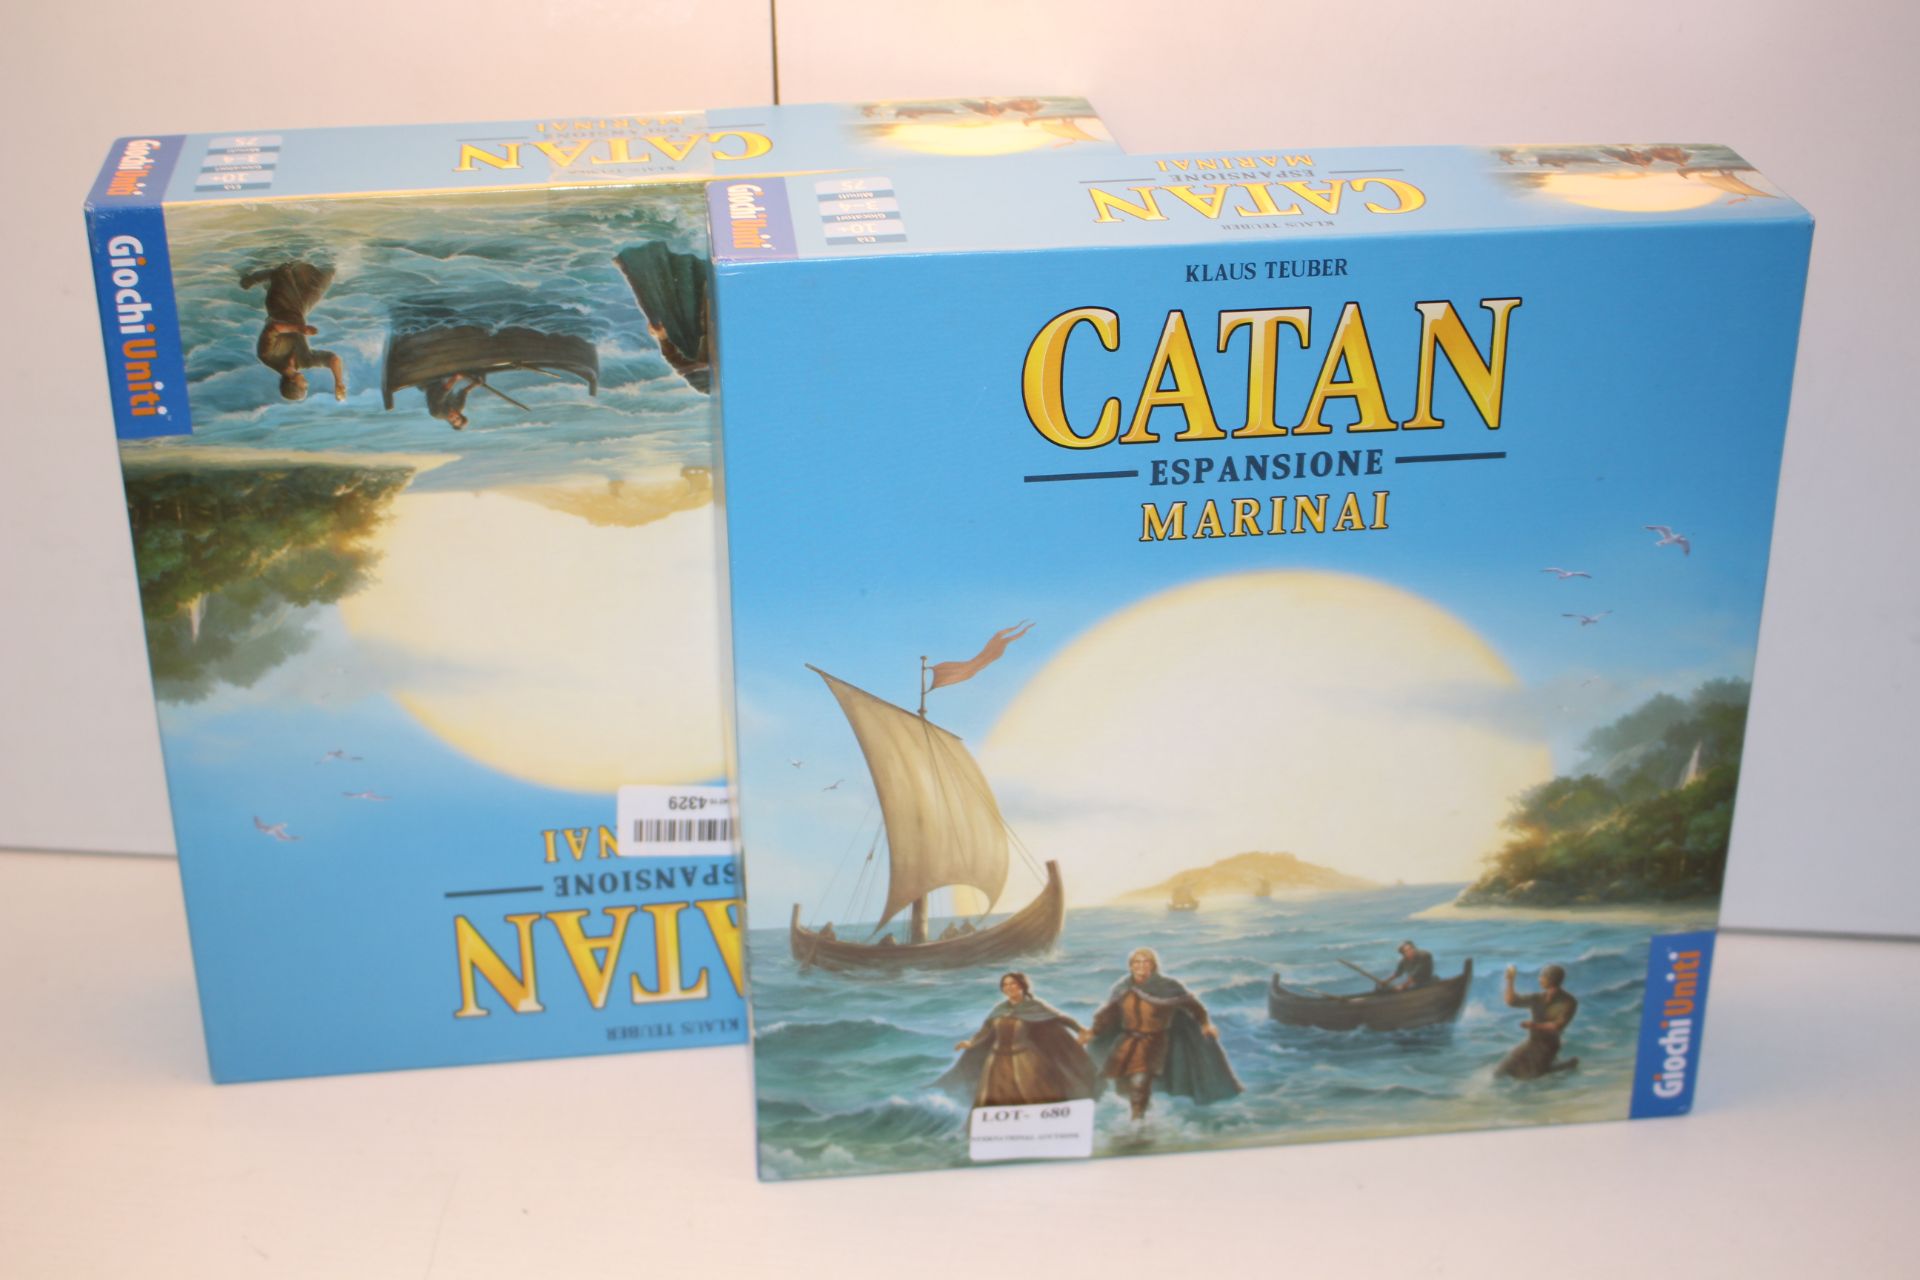 2X BOXED ASSORTED TOYS (IMAGE DEPICTS STOCK)Condition ReportAppraisal Available on Request- All